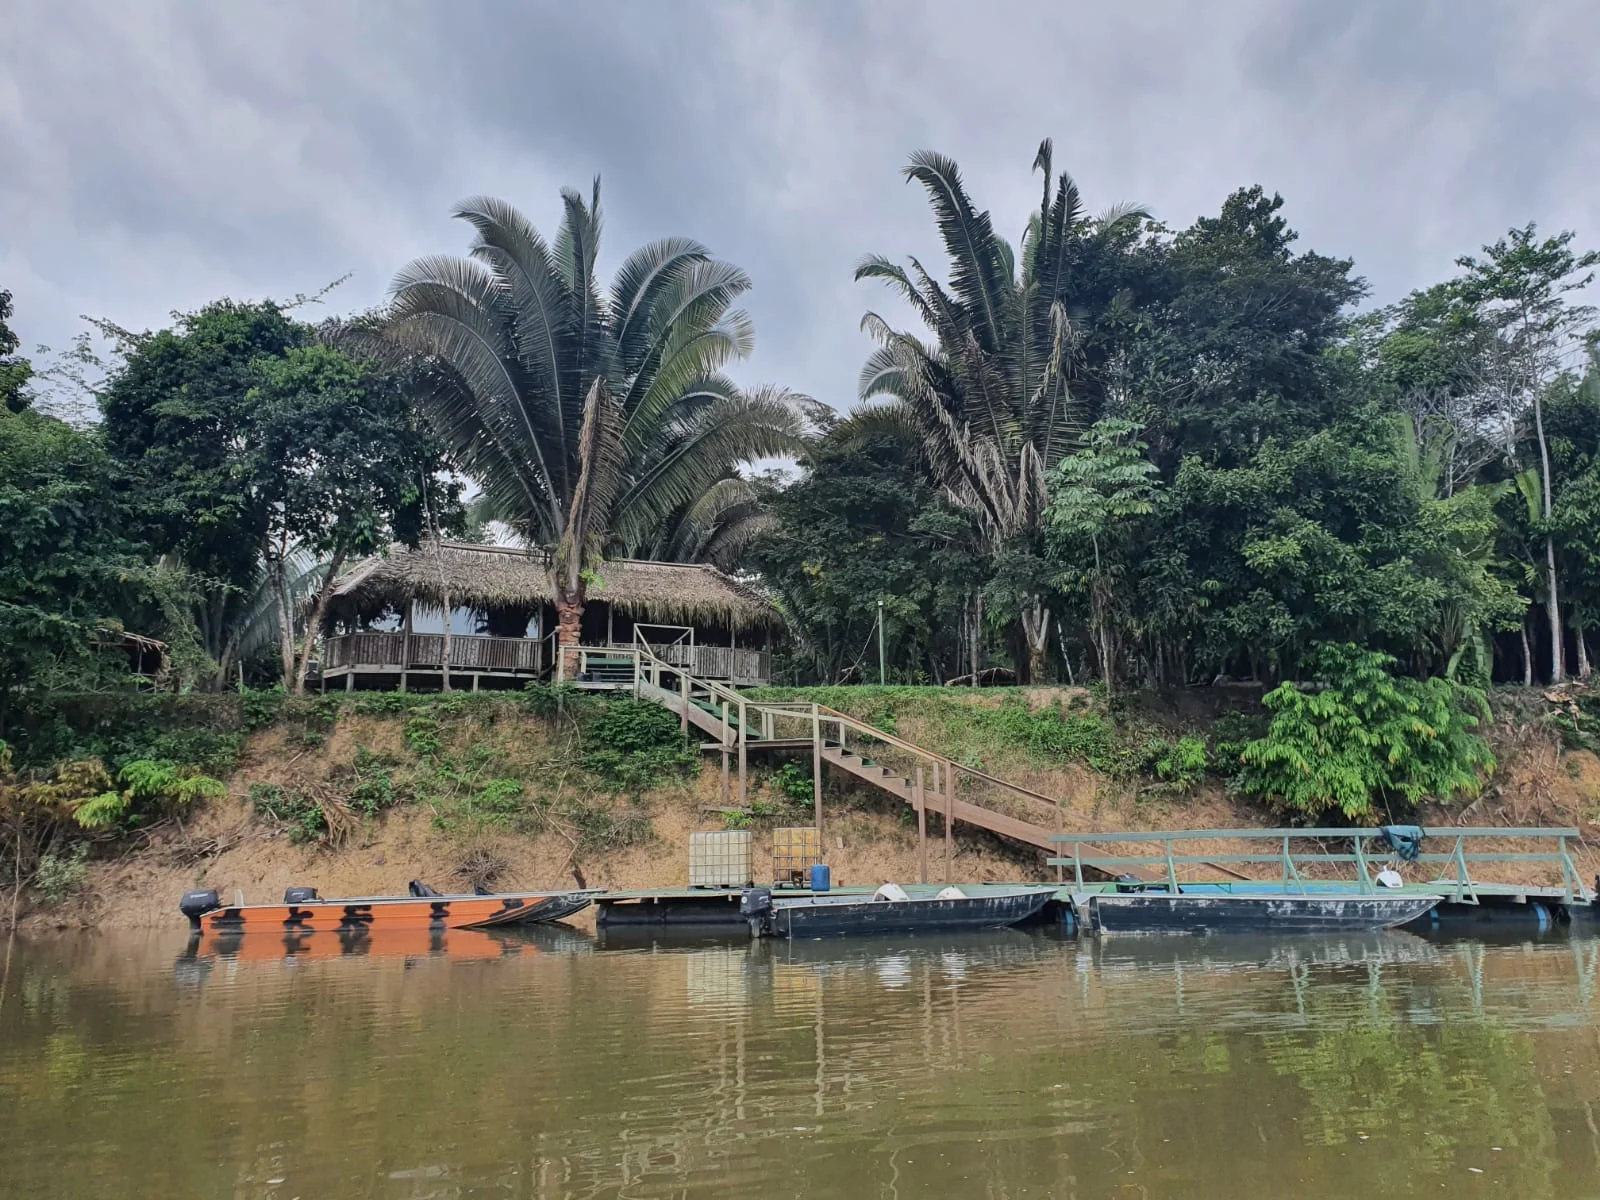 a jungle lodge and dock as seen from the Aripuana river